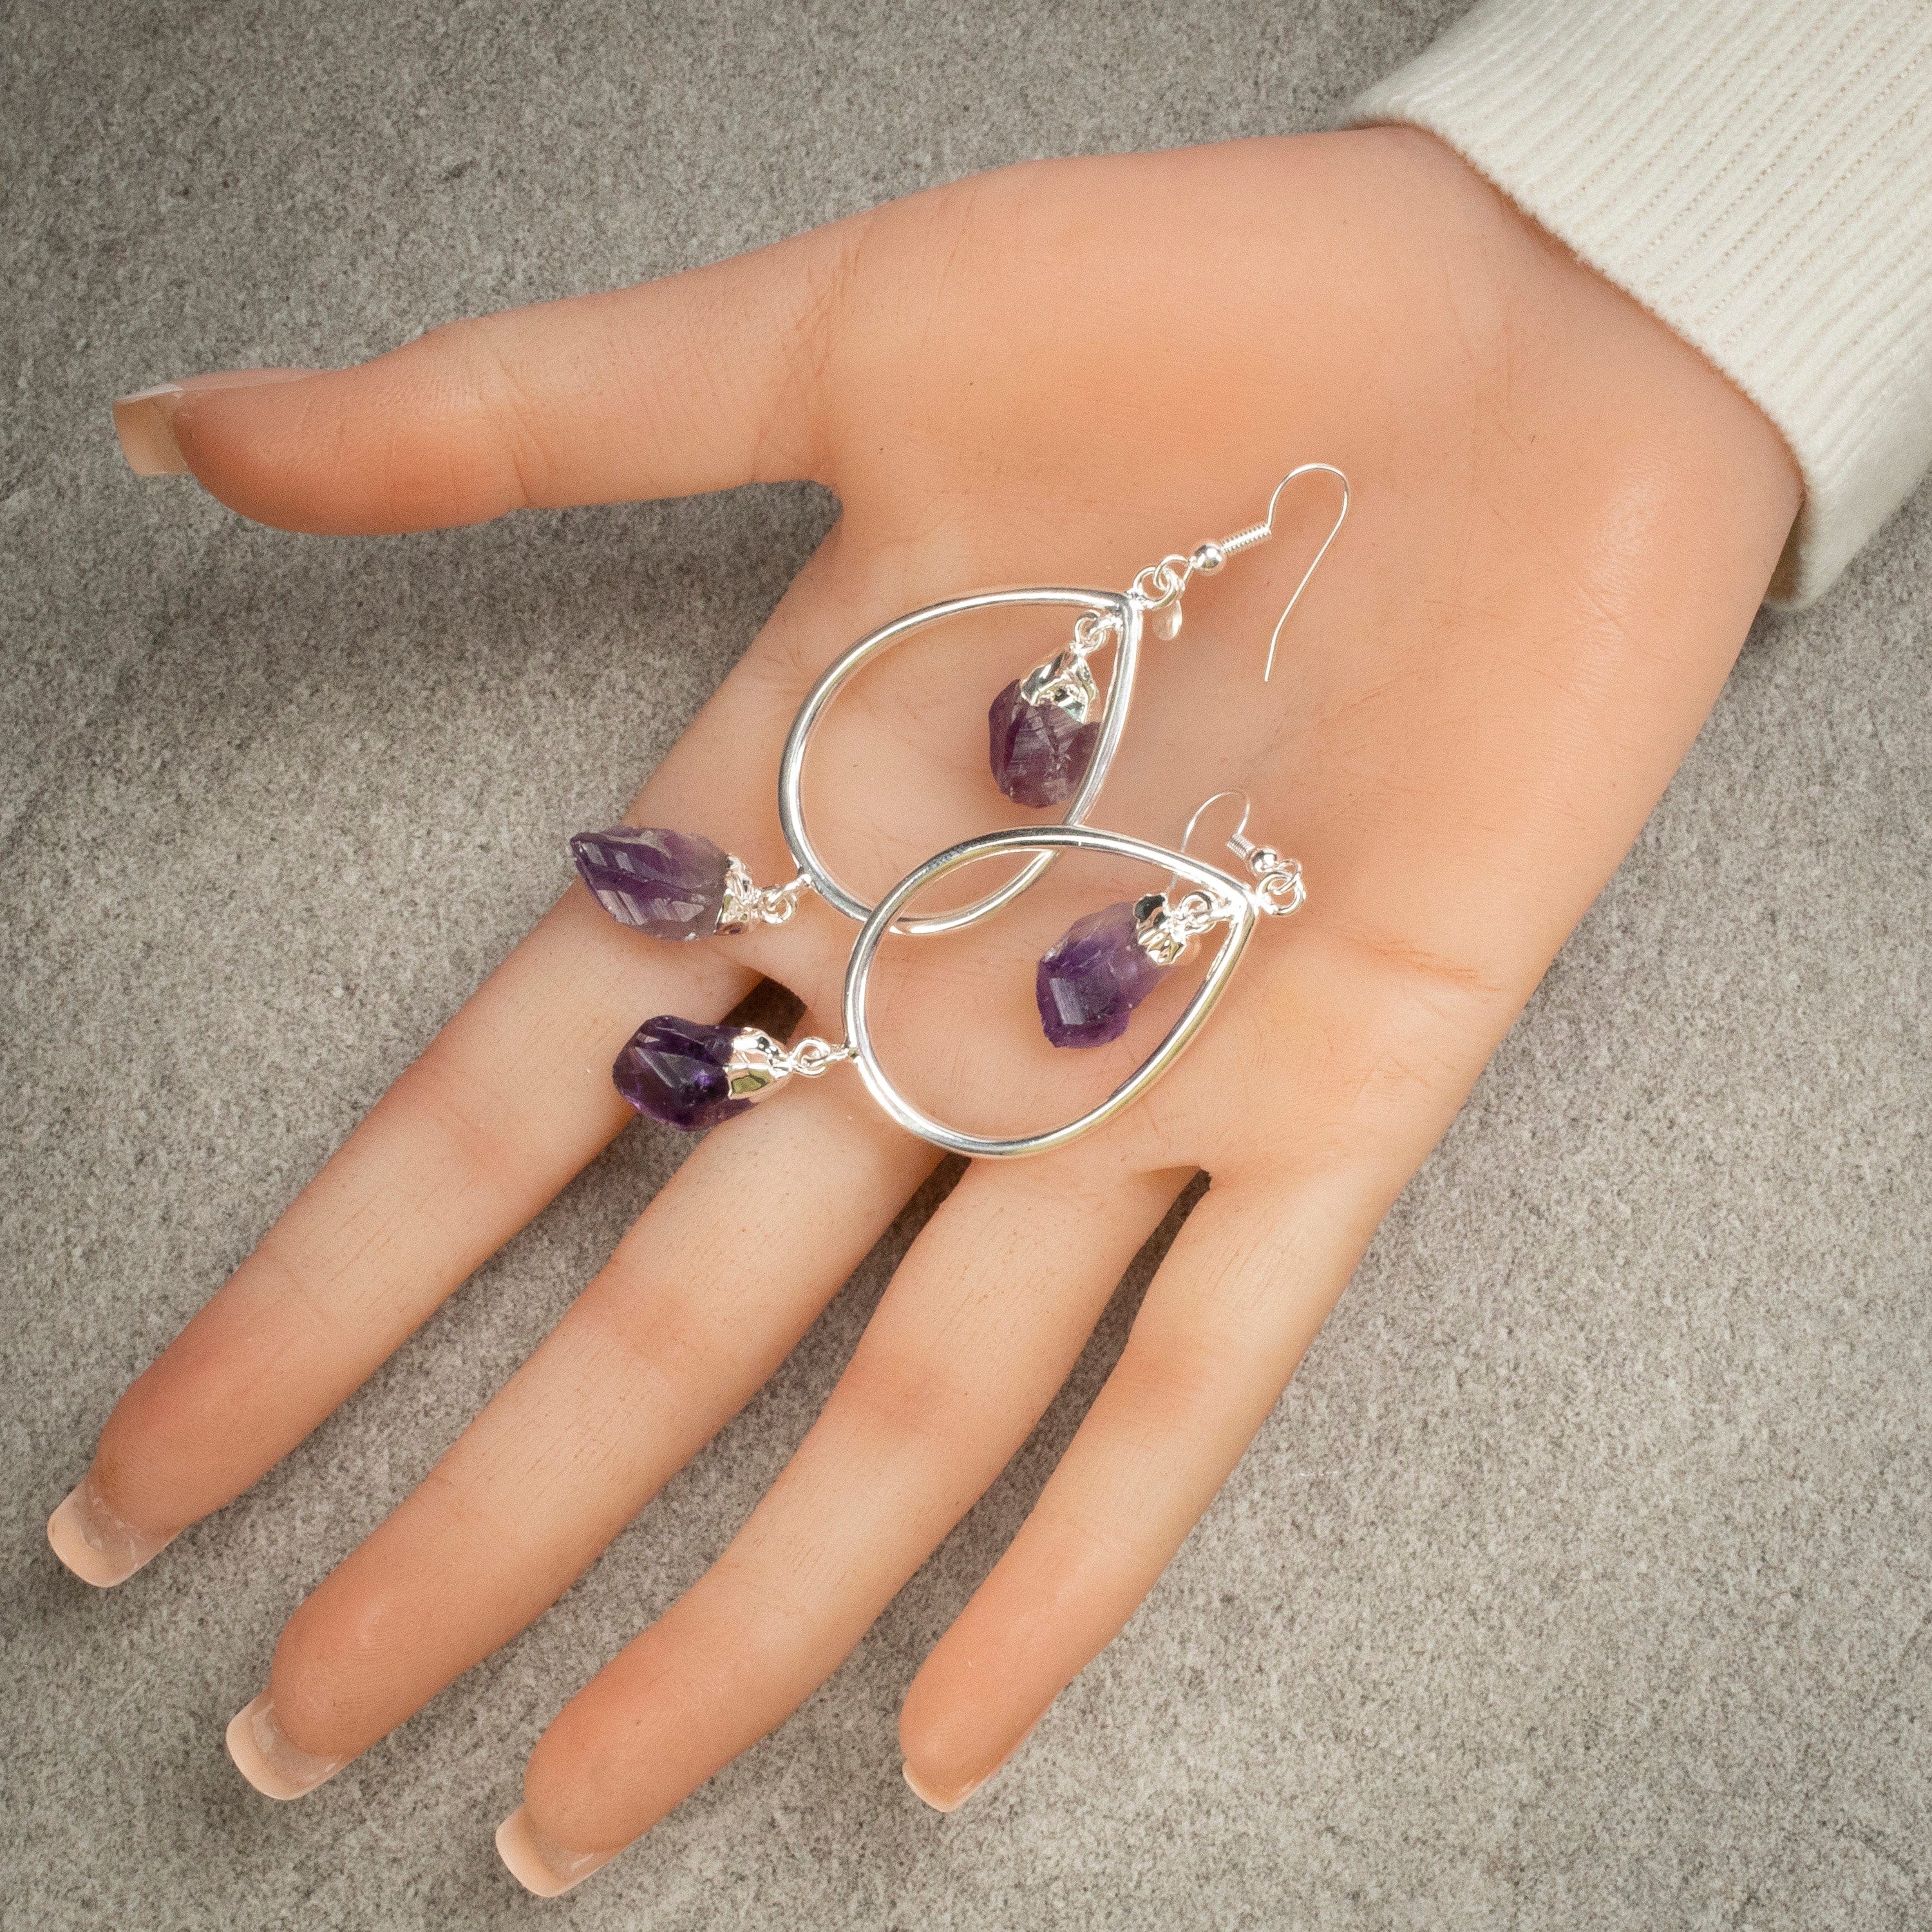 Kalifano Crystal Jewelry Amethyst Crystal Drop Earrings with French Hook CJE-1548-AM